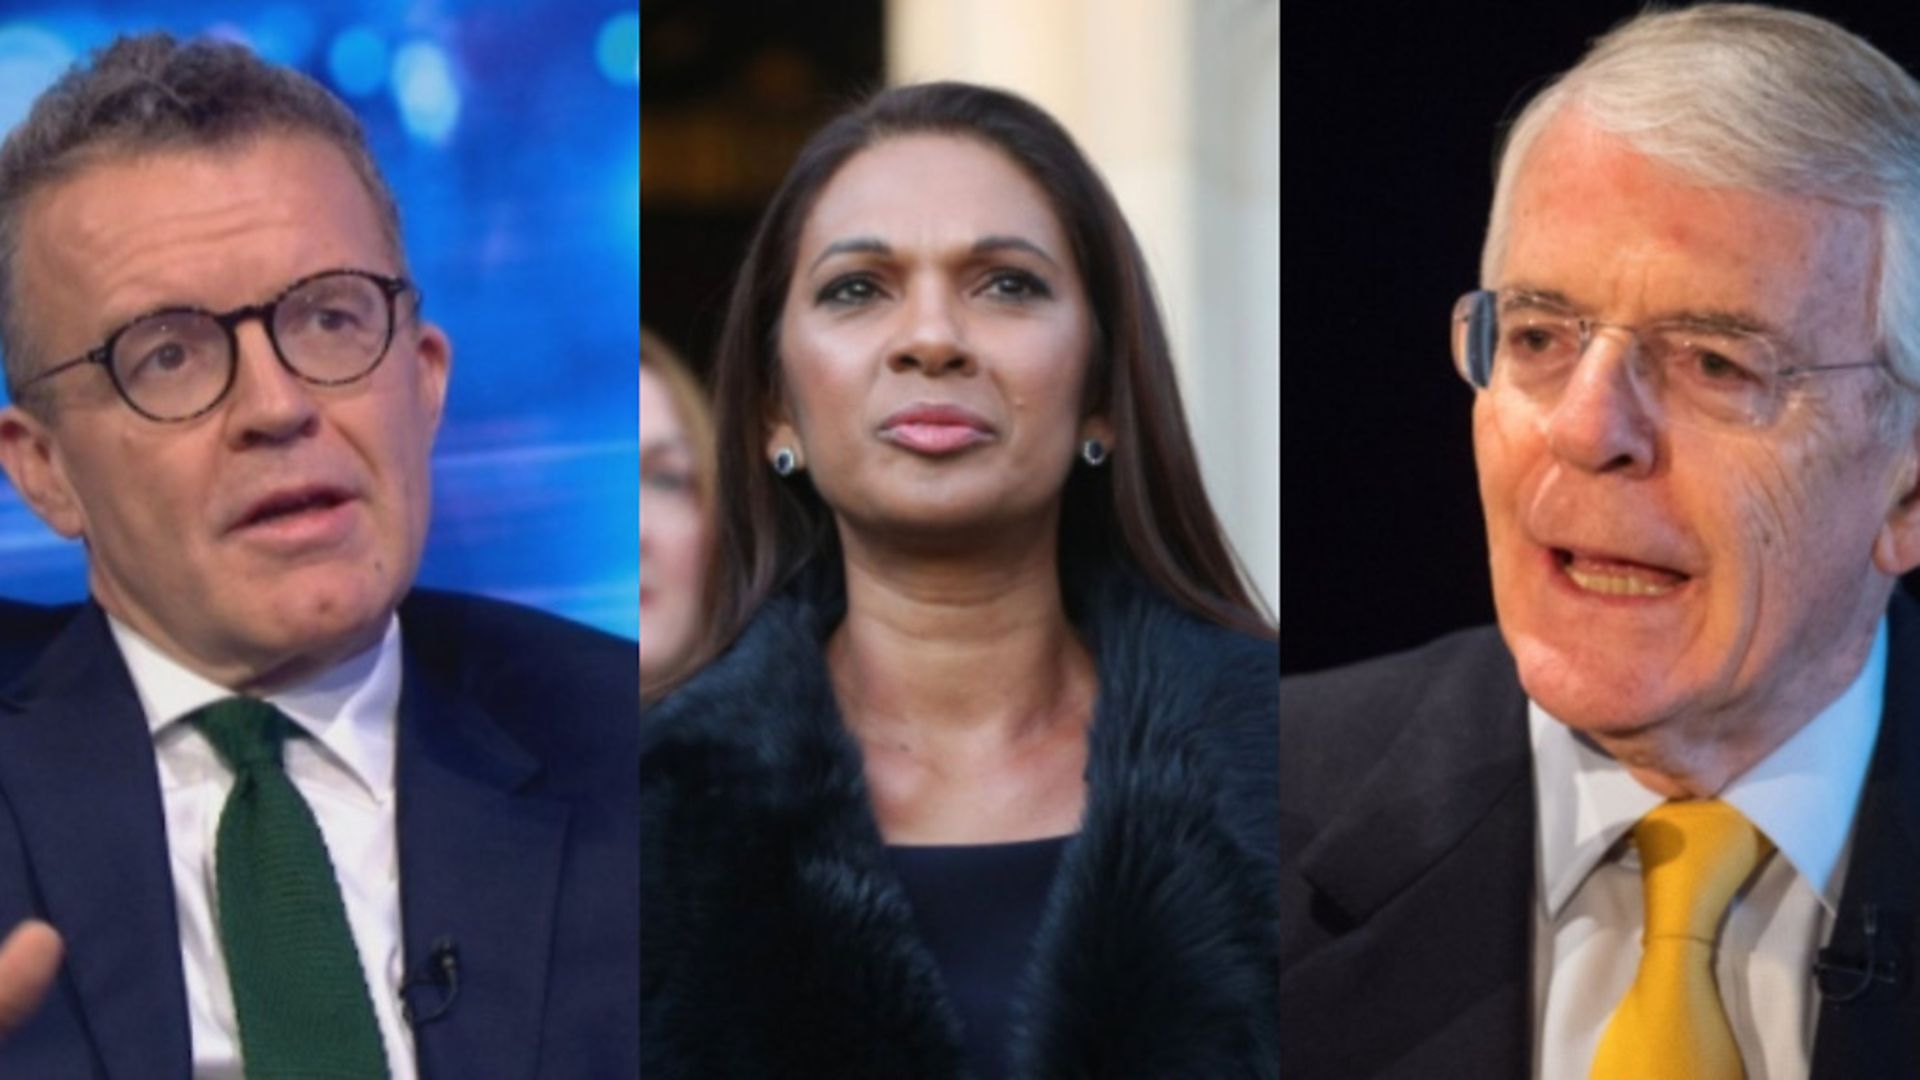 Gina Miller's legal challenge to Boris Johnson's prorogation order has won the support of Tom Watson and John Major. - Credit: Archant